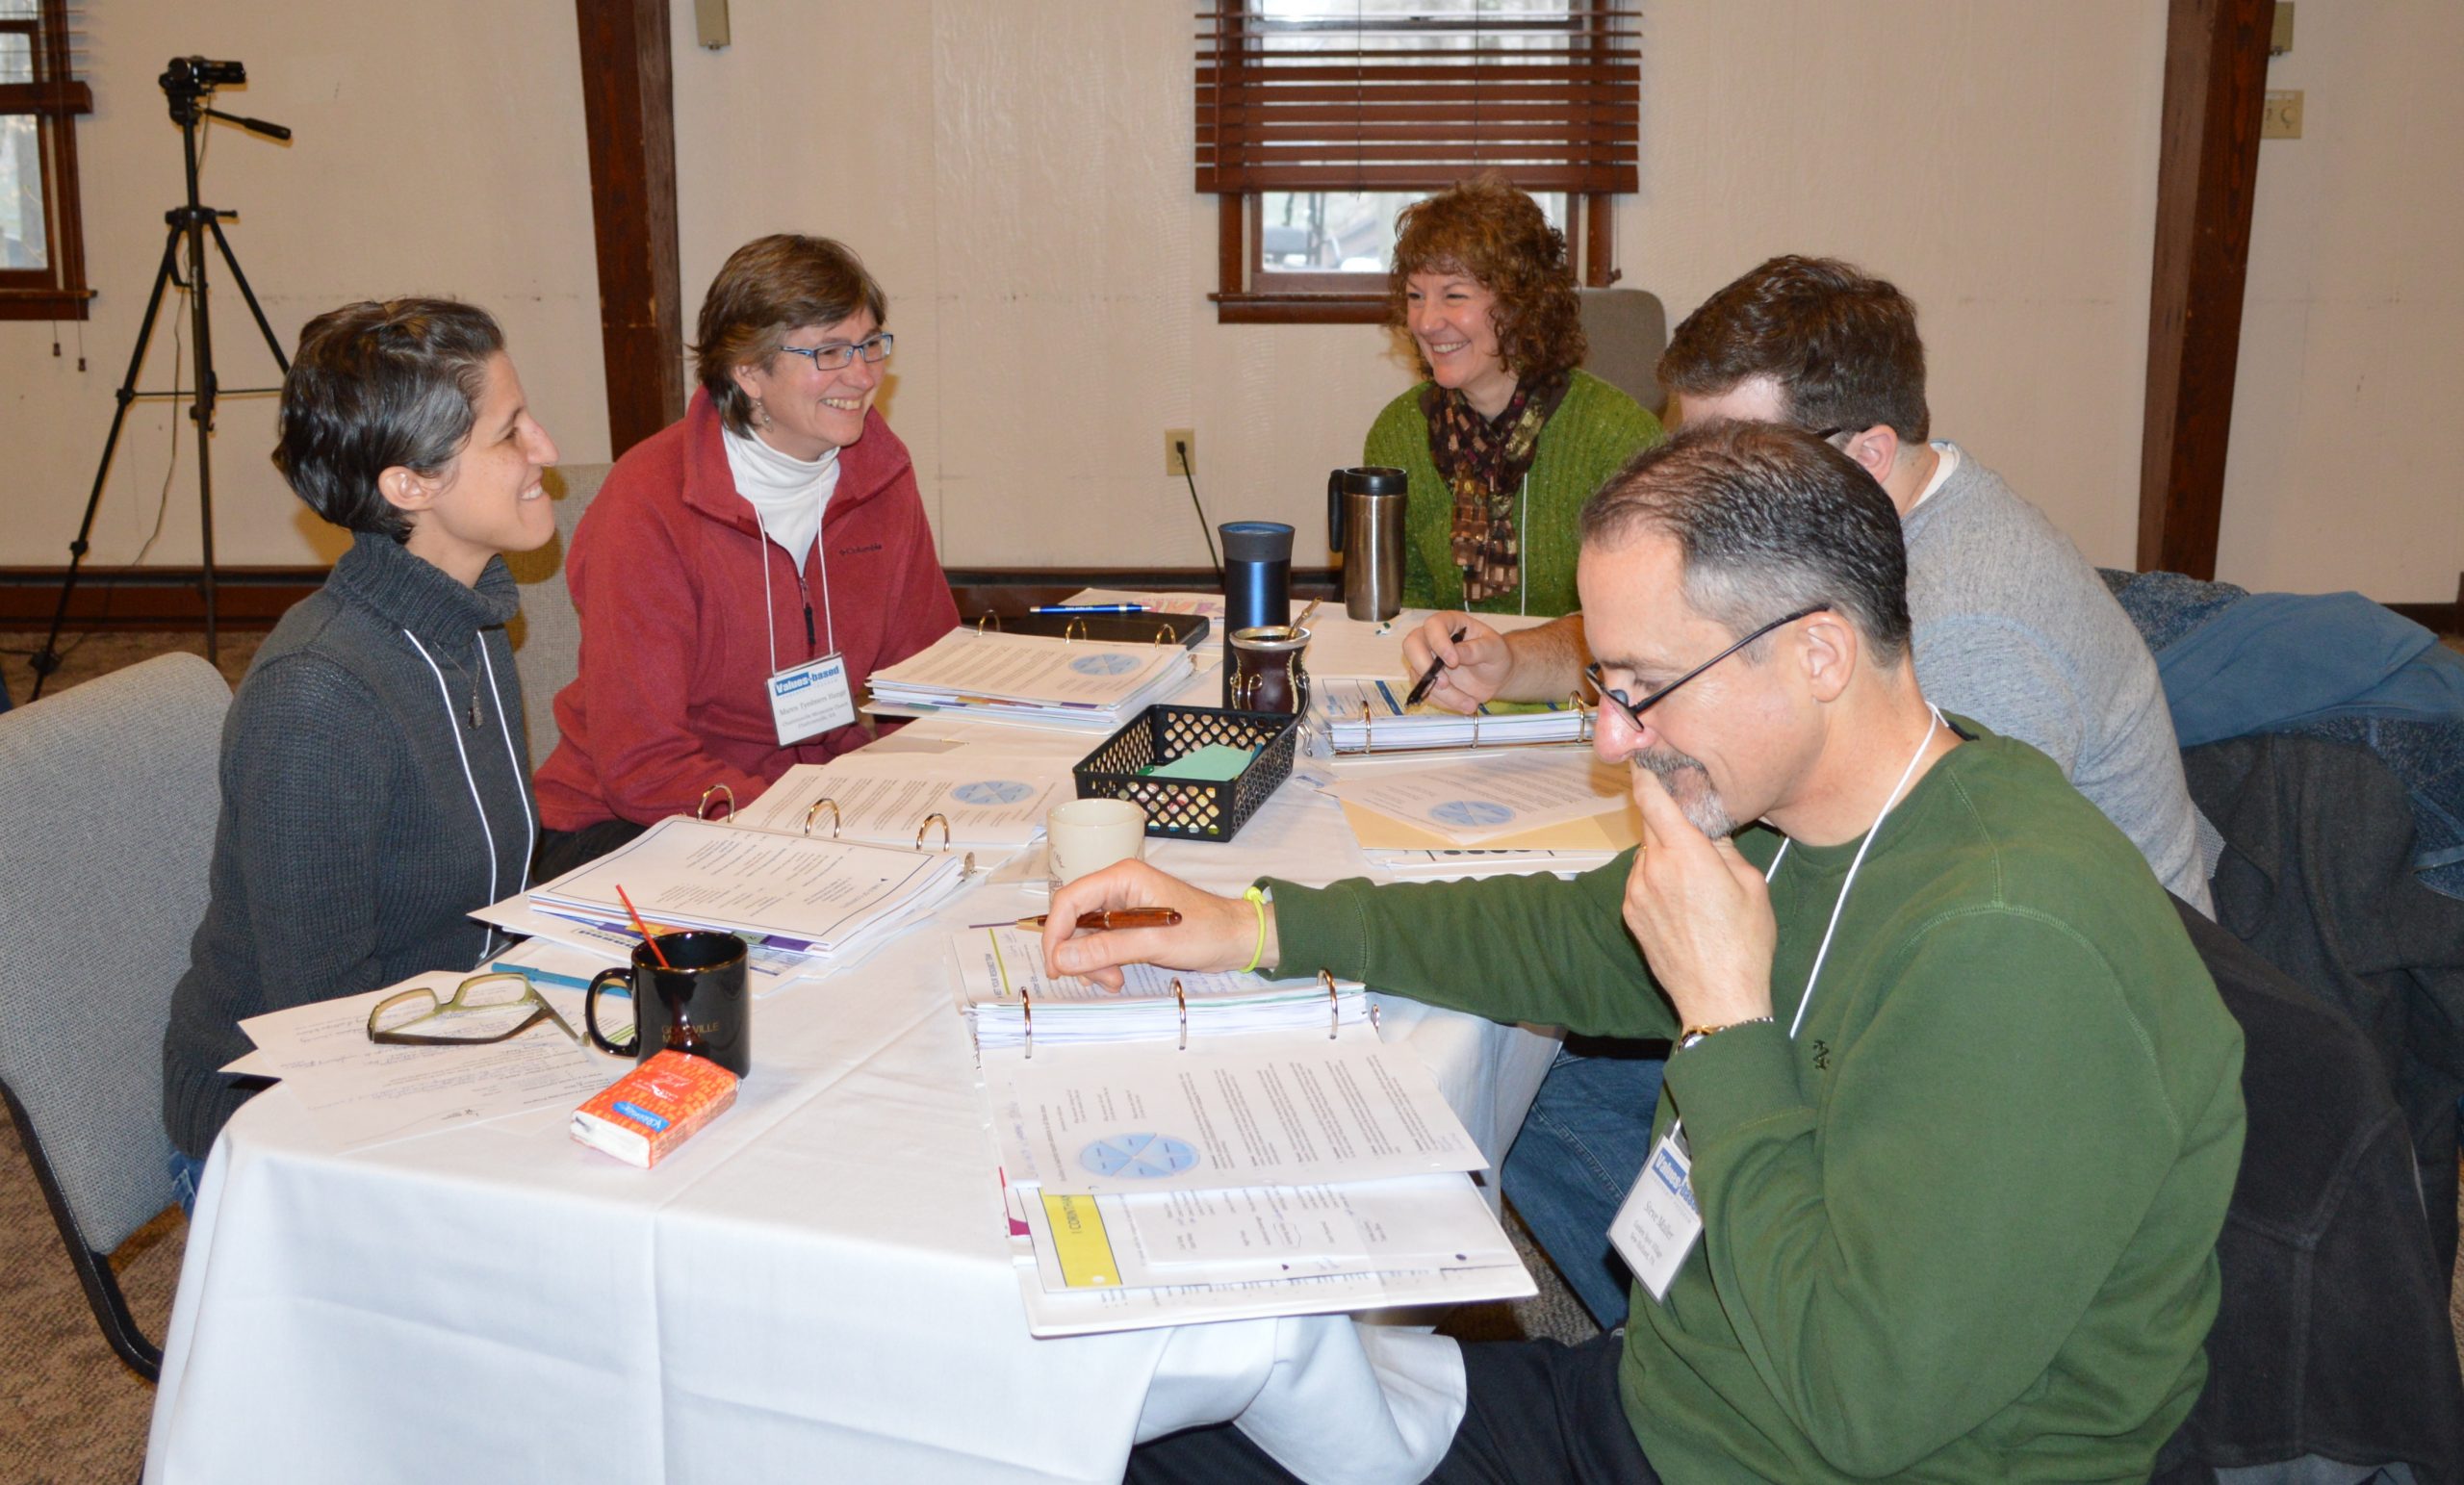 Participants in the Values-based Leadership Program discuss a presentation given during their February meeting. (Laurelville Mennonite Church Center photo)